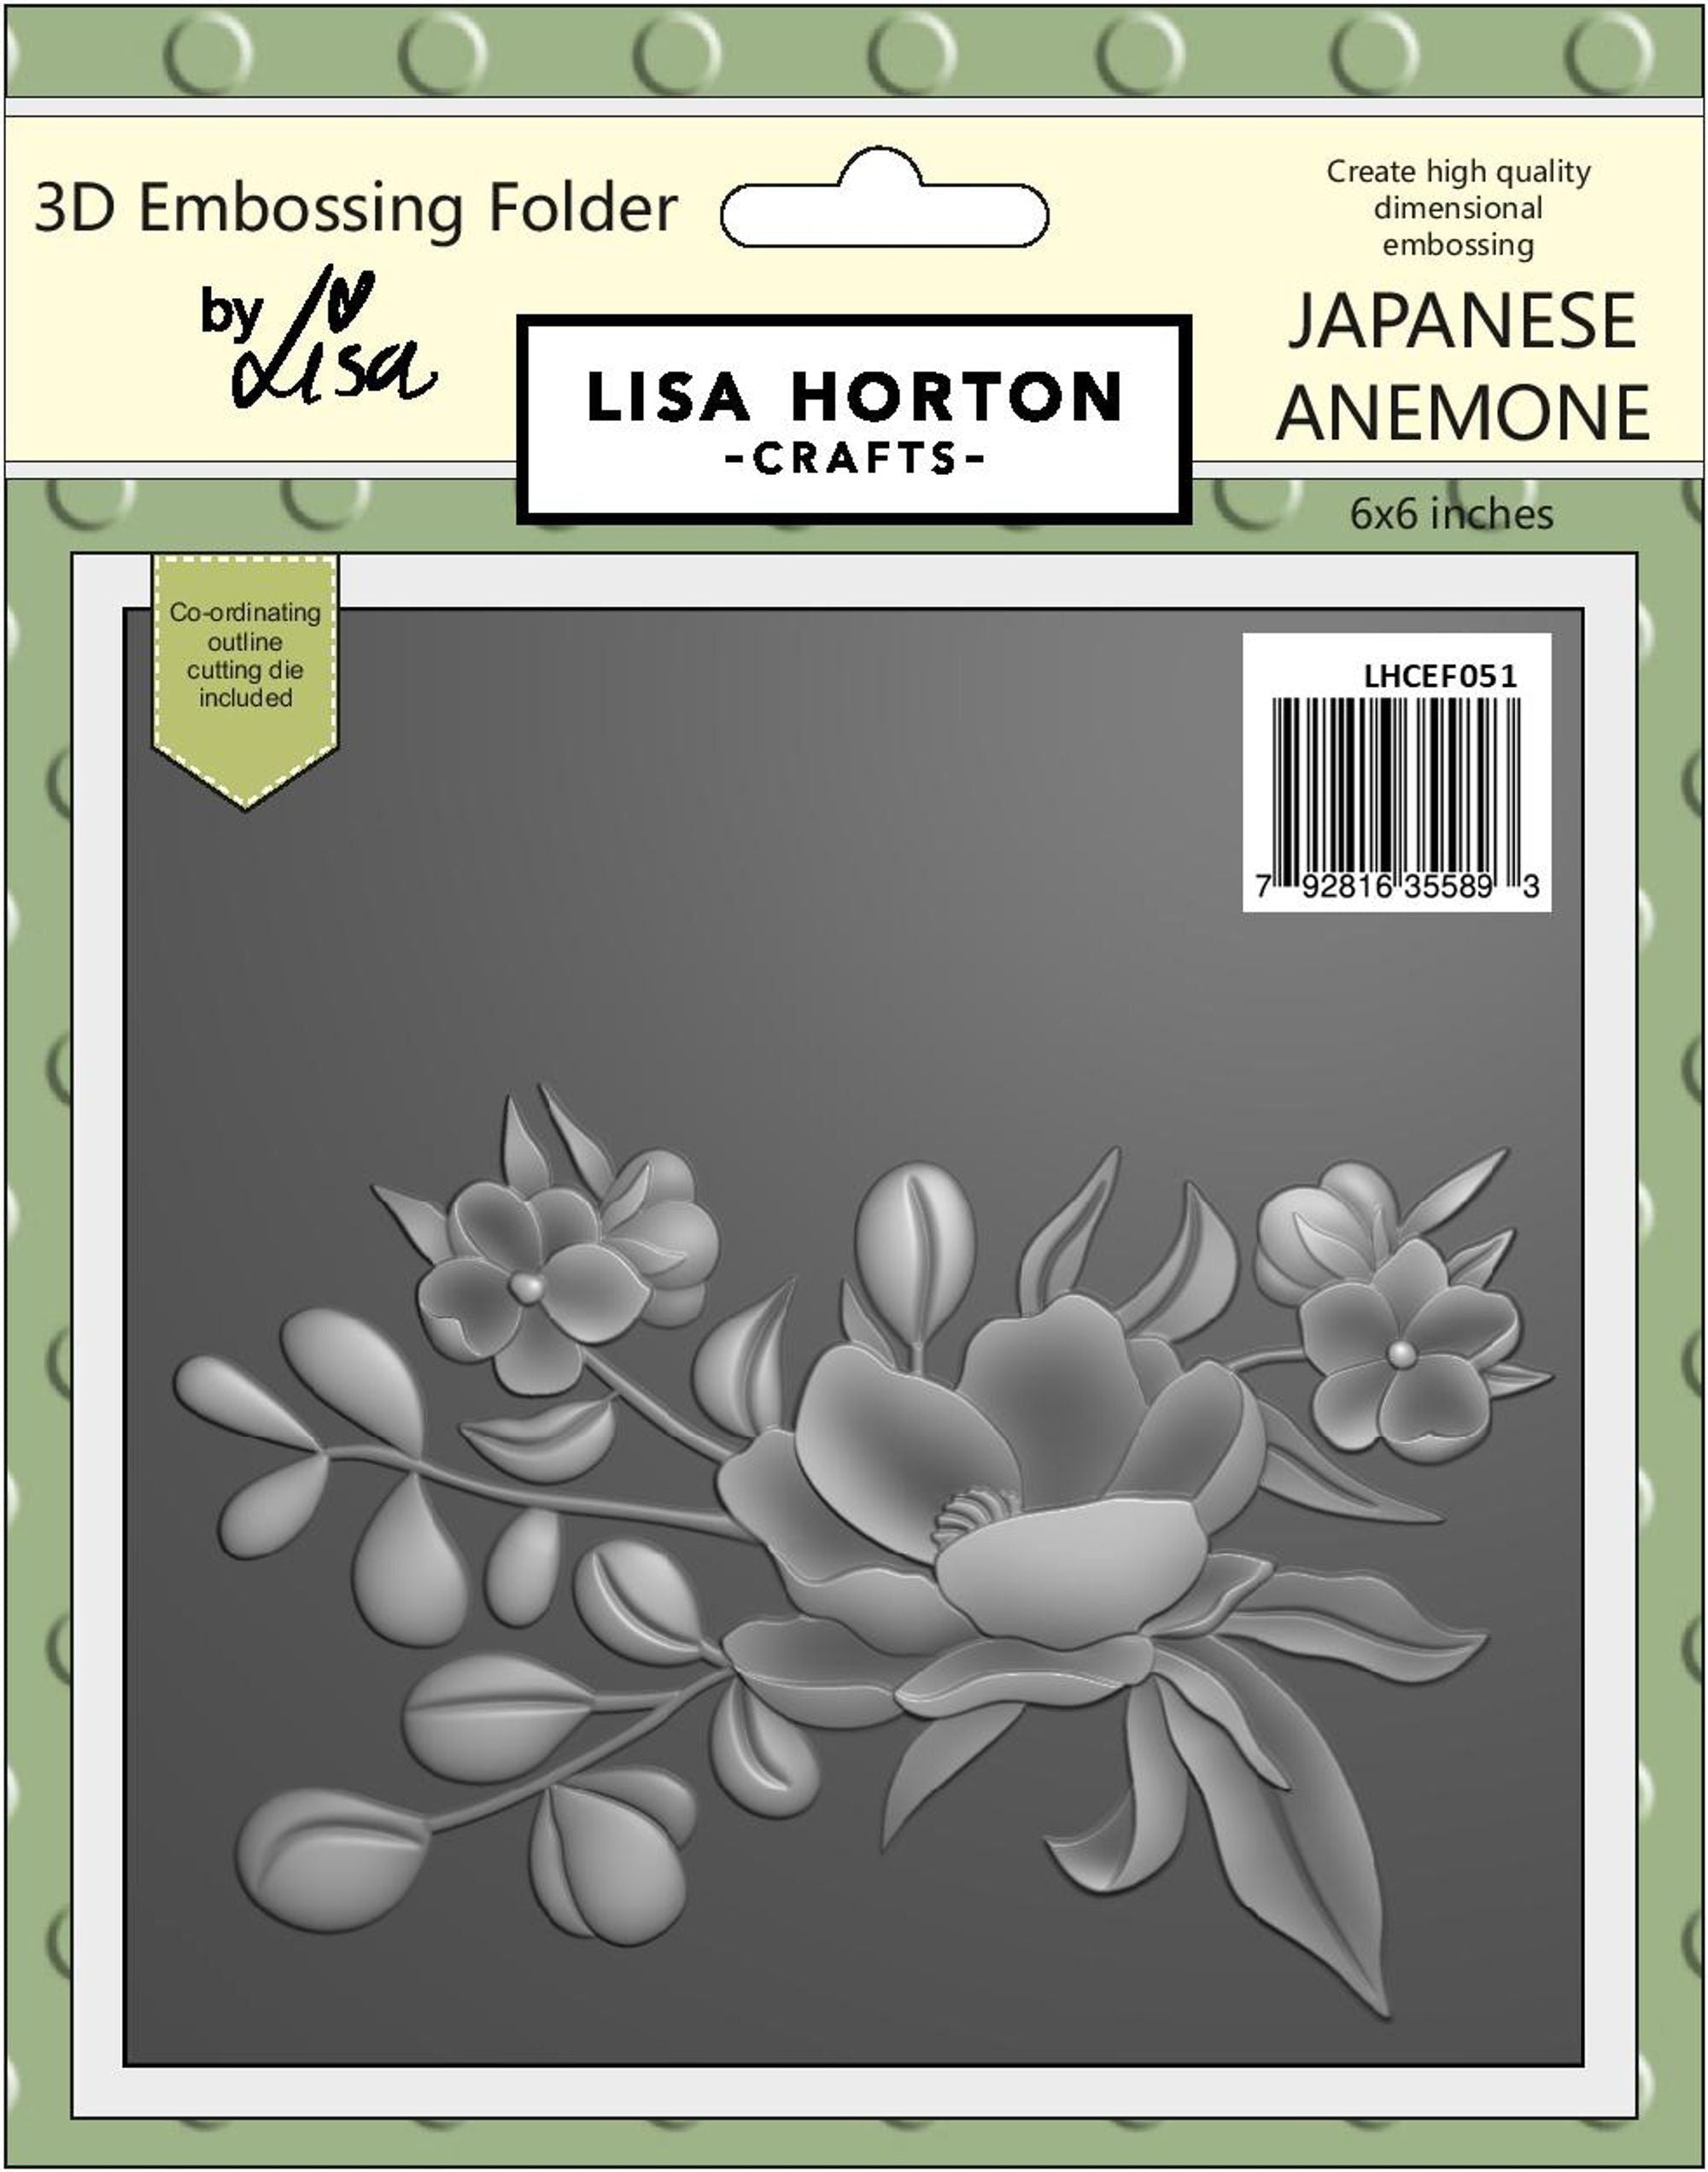 Japanese Anemone 6x6 3D Embossing Folder With Cutting Die